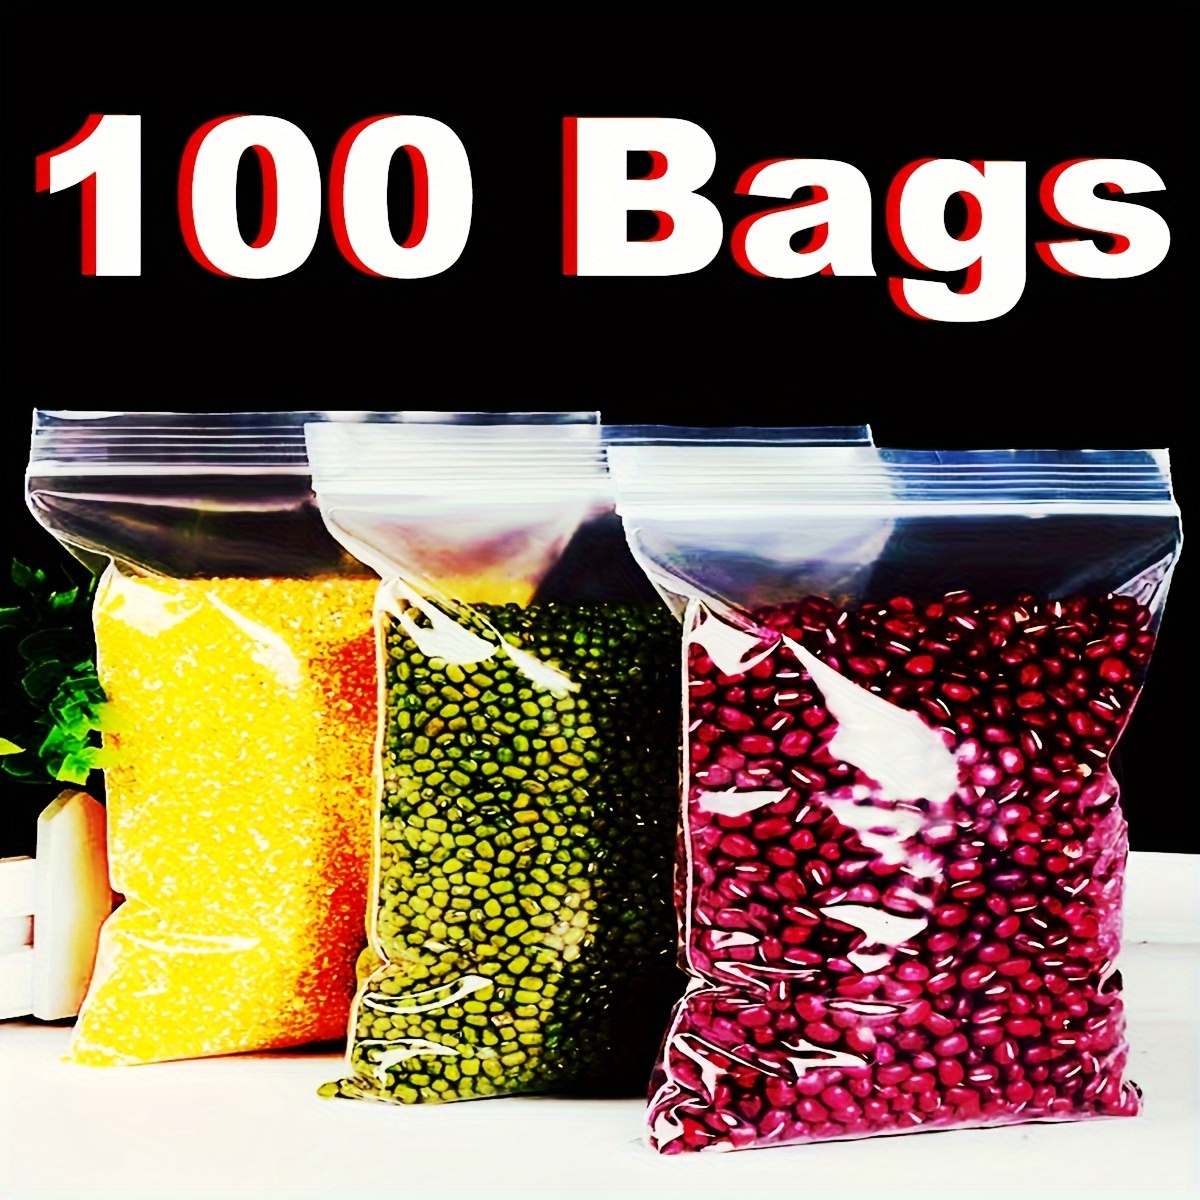 

100-piece Durable Zip-top Freezer Bags - Leakproof & Stain-resistant Storage For Food, Snacks, And Spices, 4.7" X 4.7